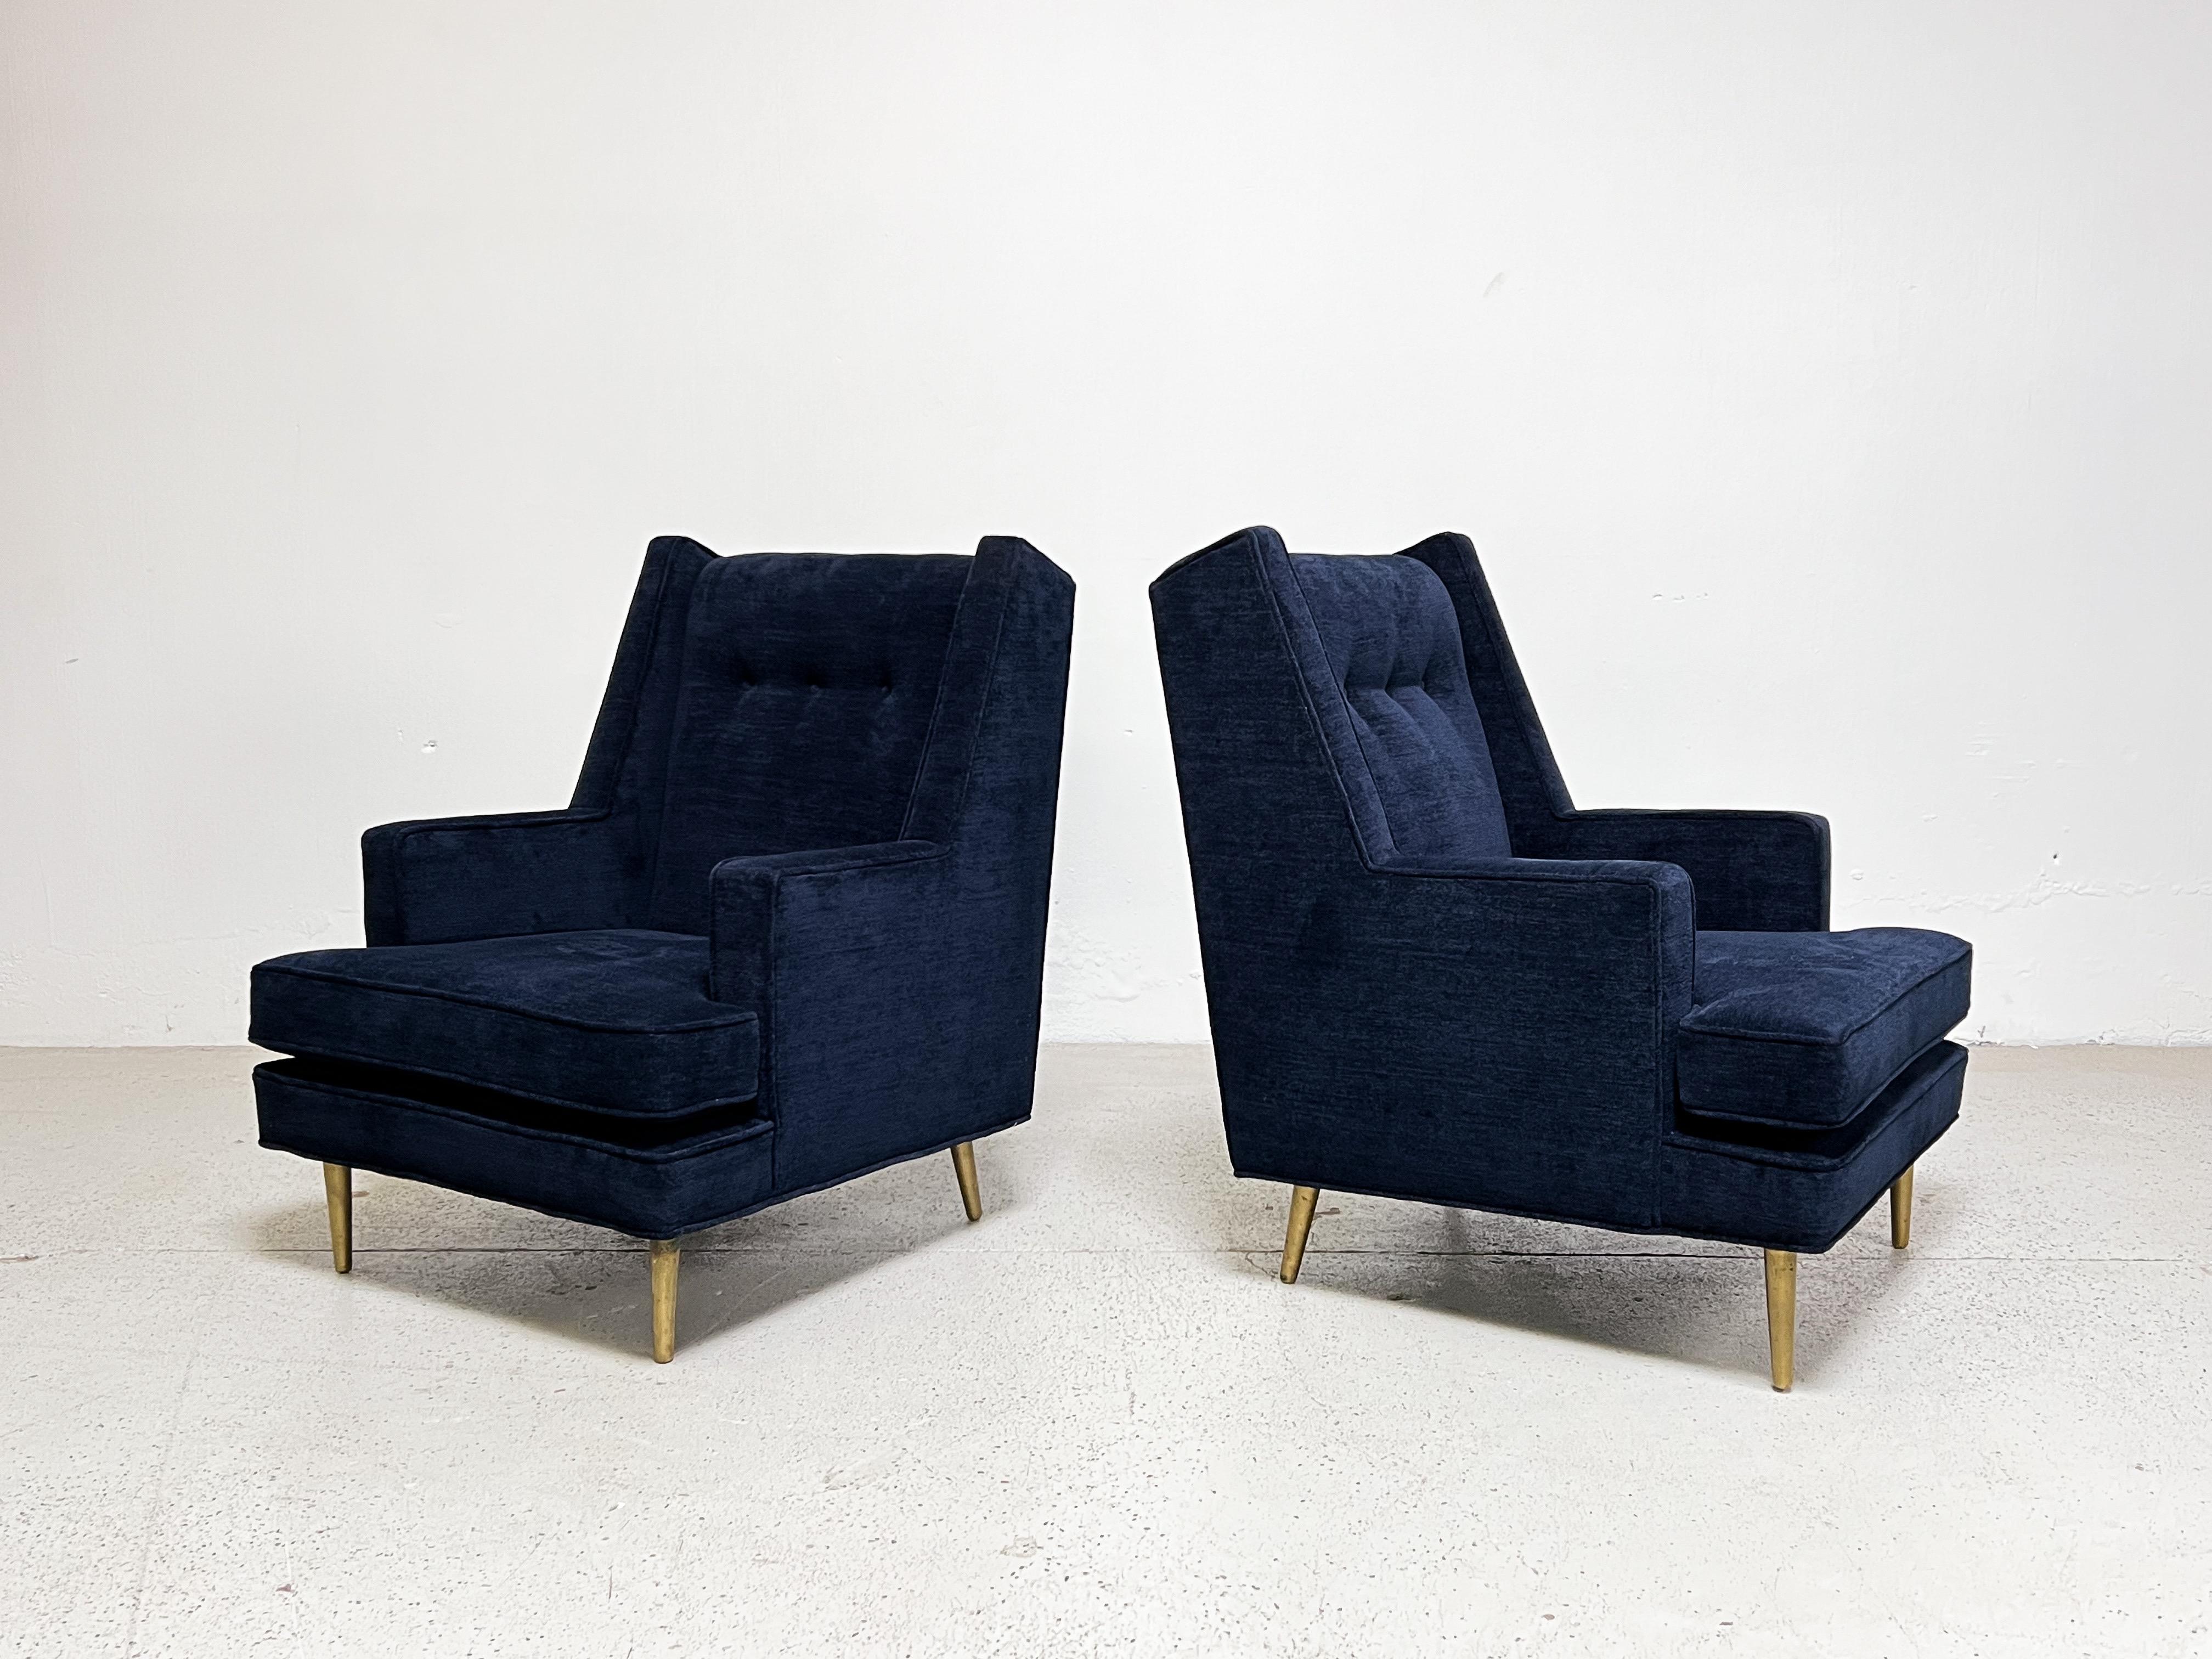 Mid-20th Century Pair of Lounge Chairs on Brass Legs by Edward Wormley for Dunbar For Sale